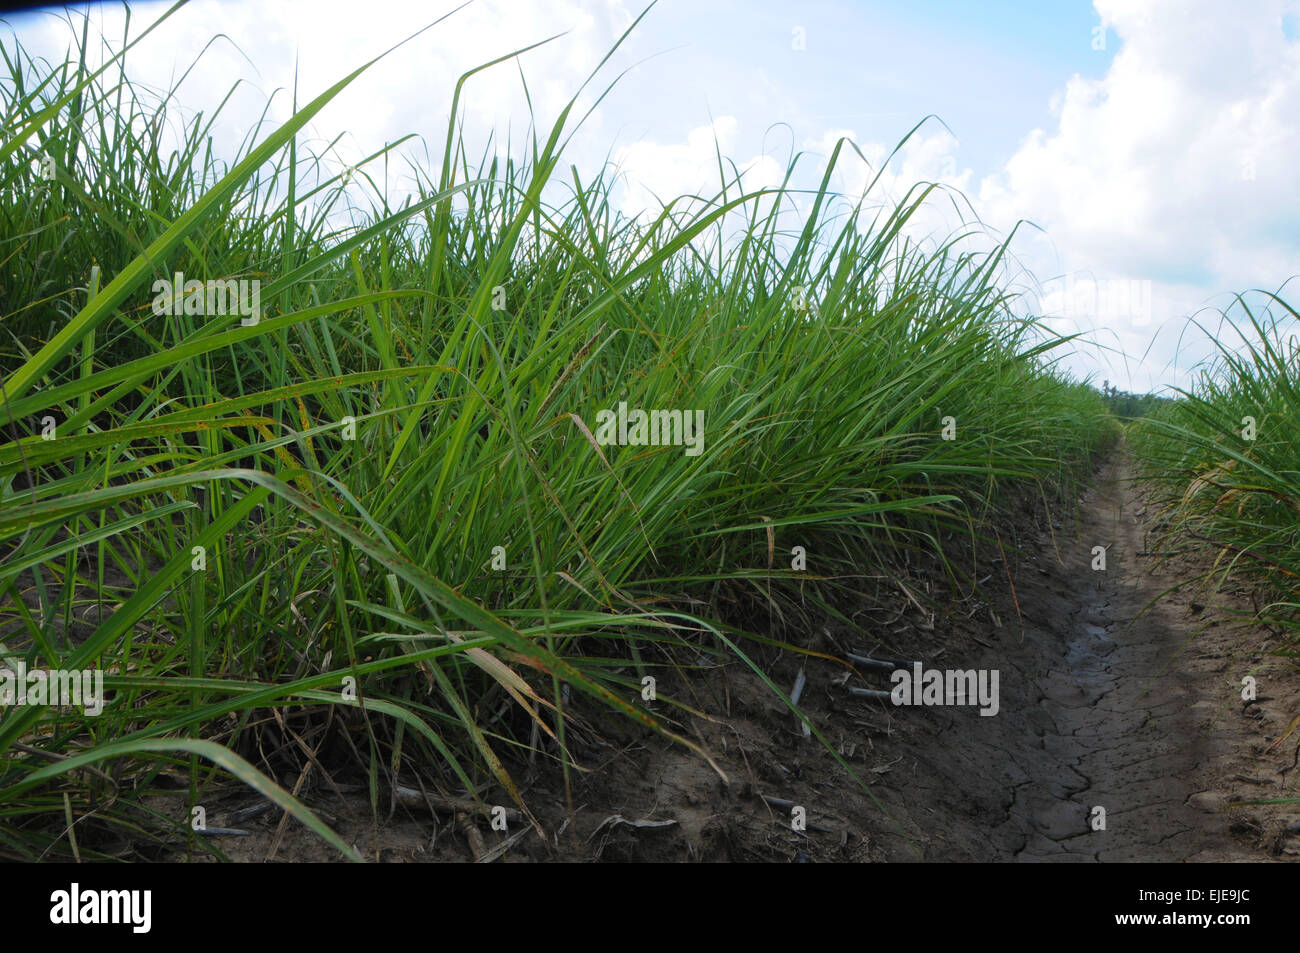 Young sugar cane plants growing in fields near Houma, Louisiana, USA.  Includes close-ups of green leaves against blue skies. Stock Photo